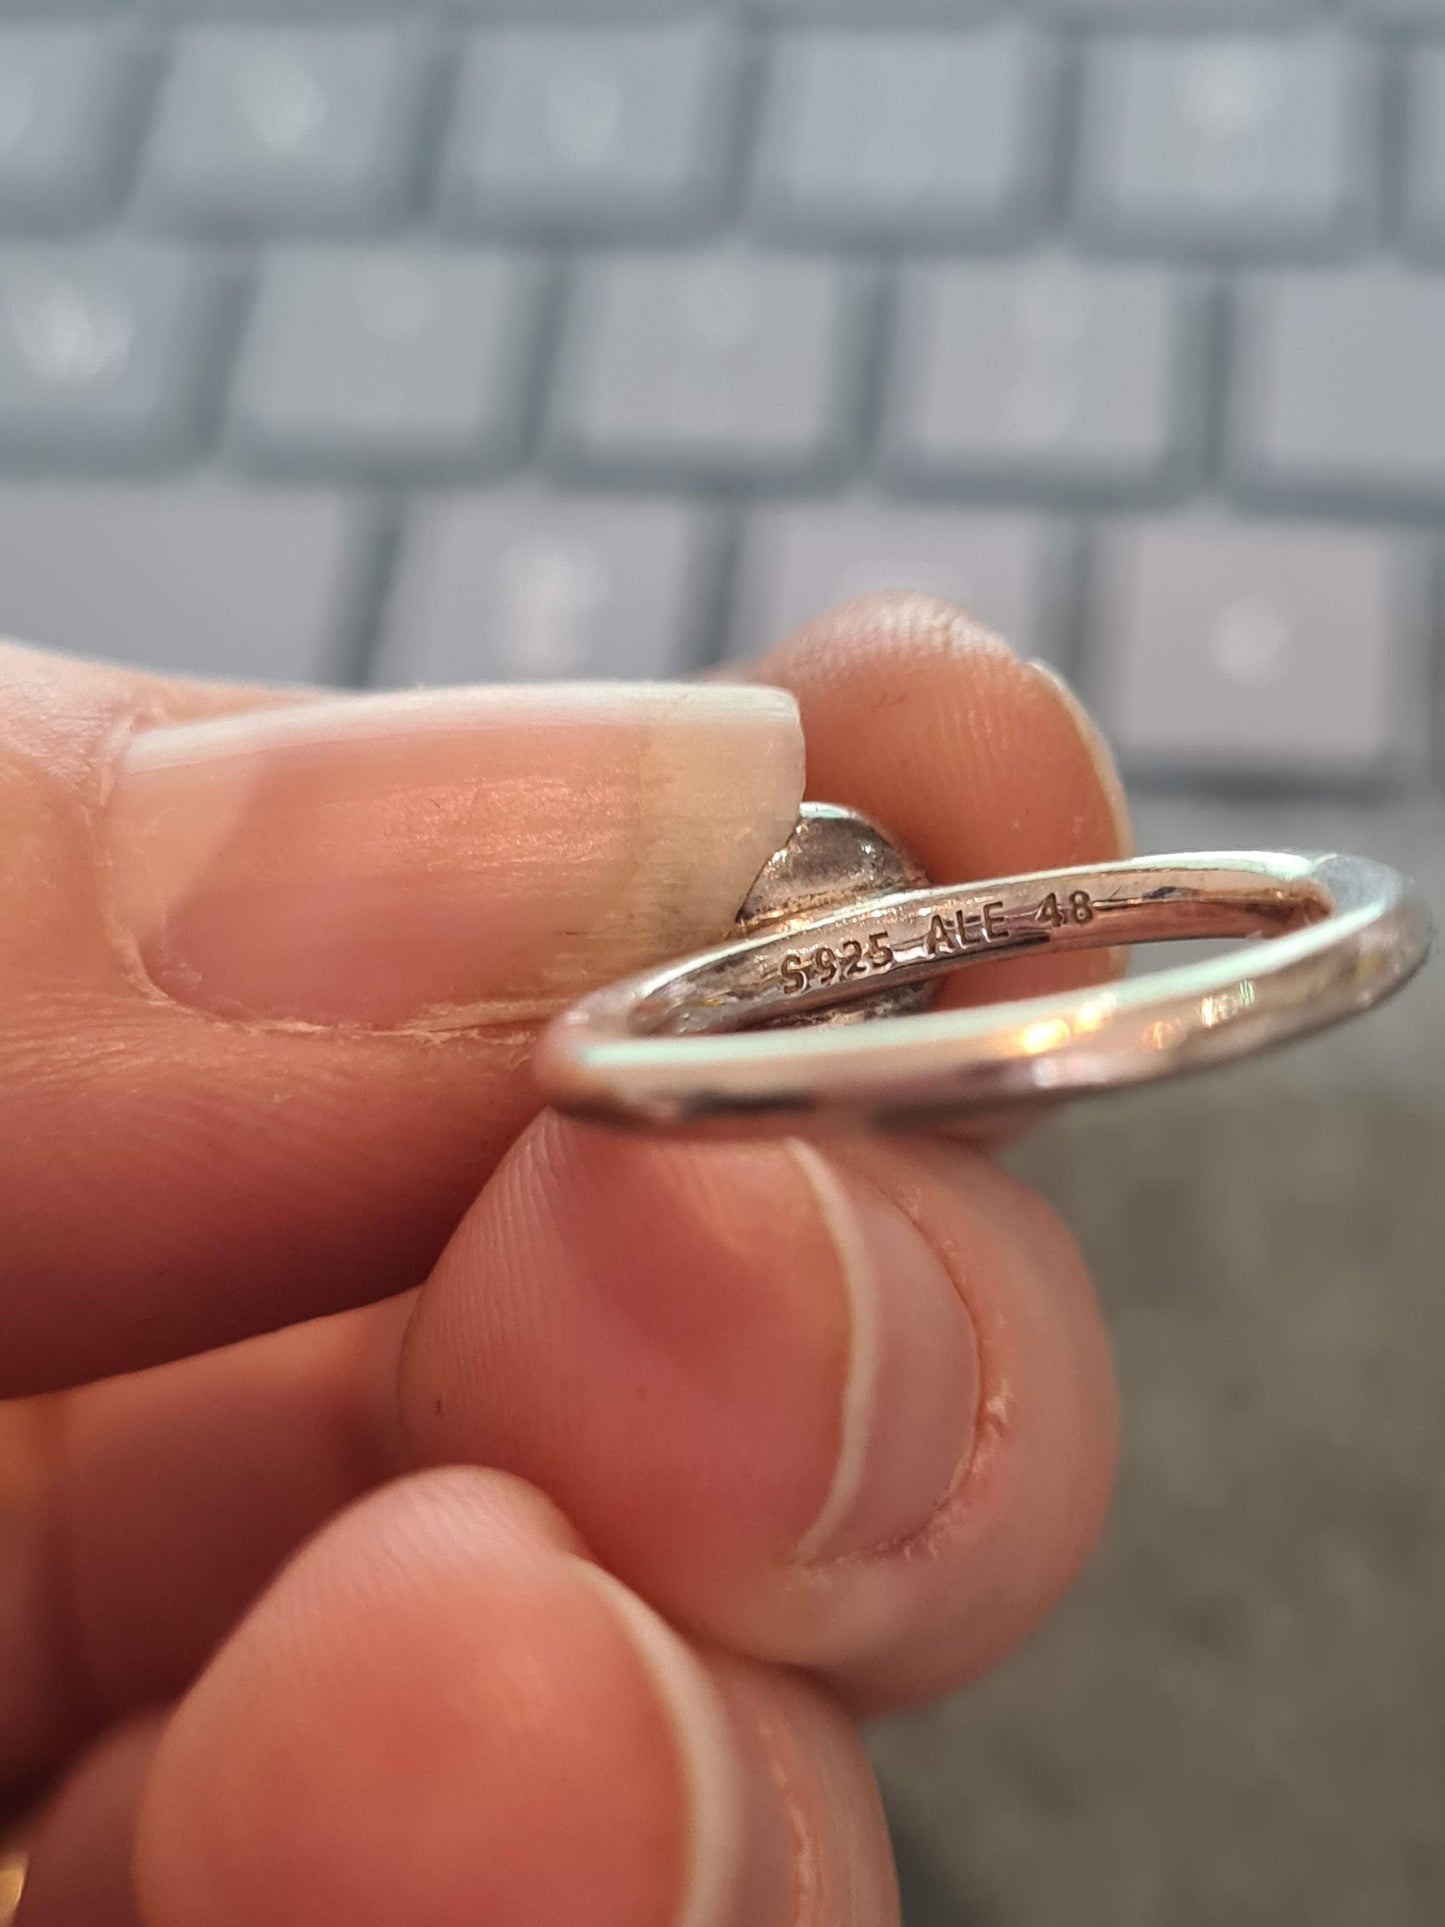 Genuine Pandora Clear Cabochon Ring in Size 54